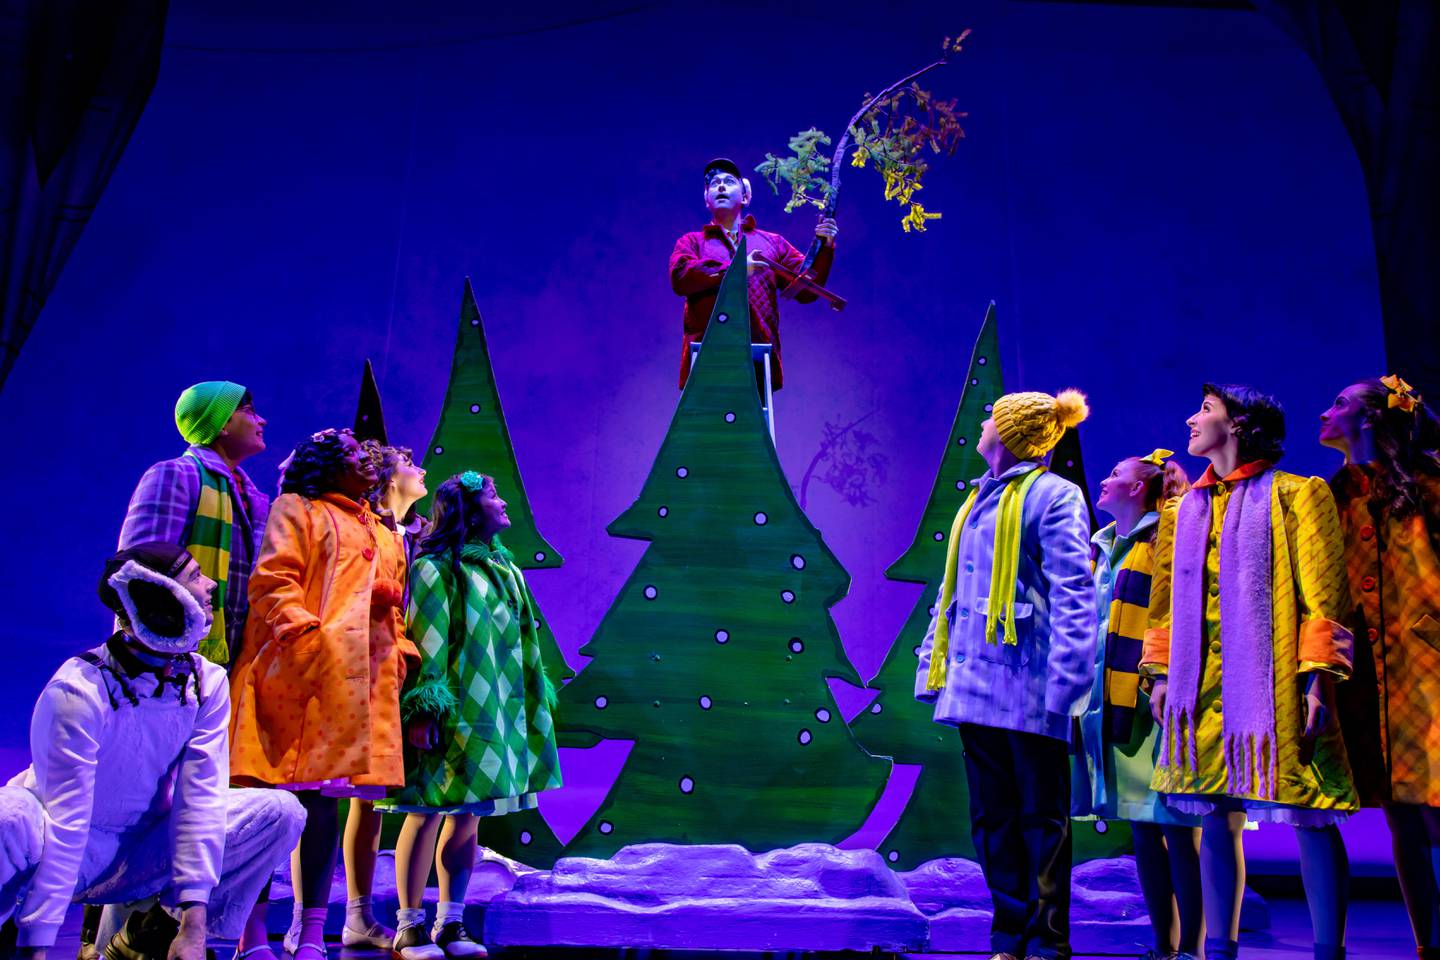 “A Charlie Brown Christmas Live On Stage" is coming to the Rialto Square Theater in Joliet, on Wednesday, Nov. 30, 2022. Tickets are on sale now.